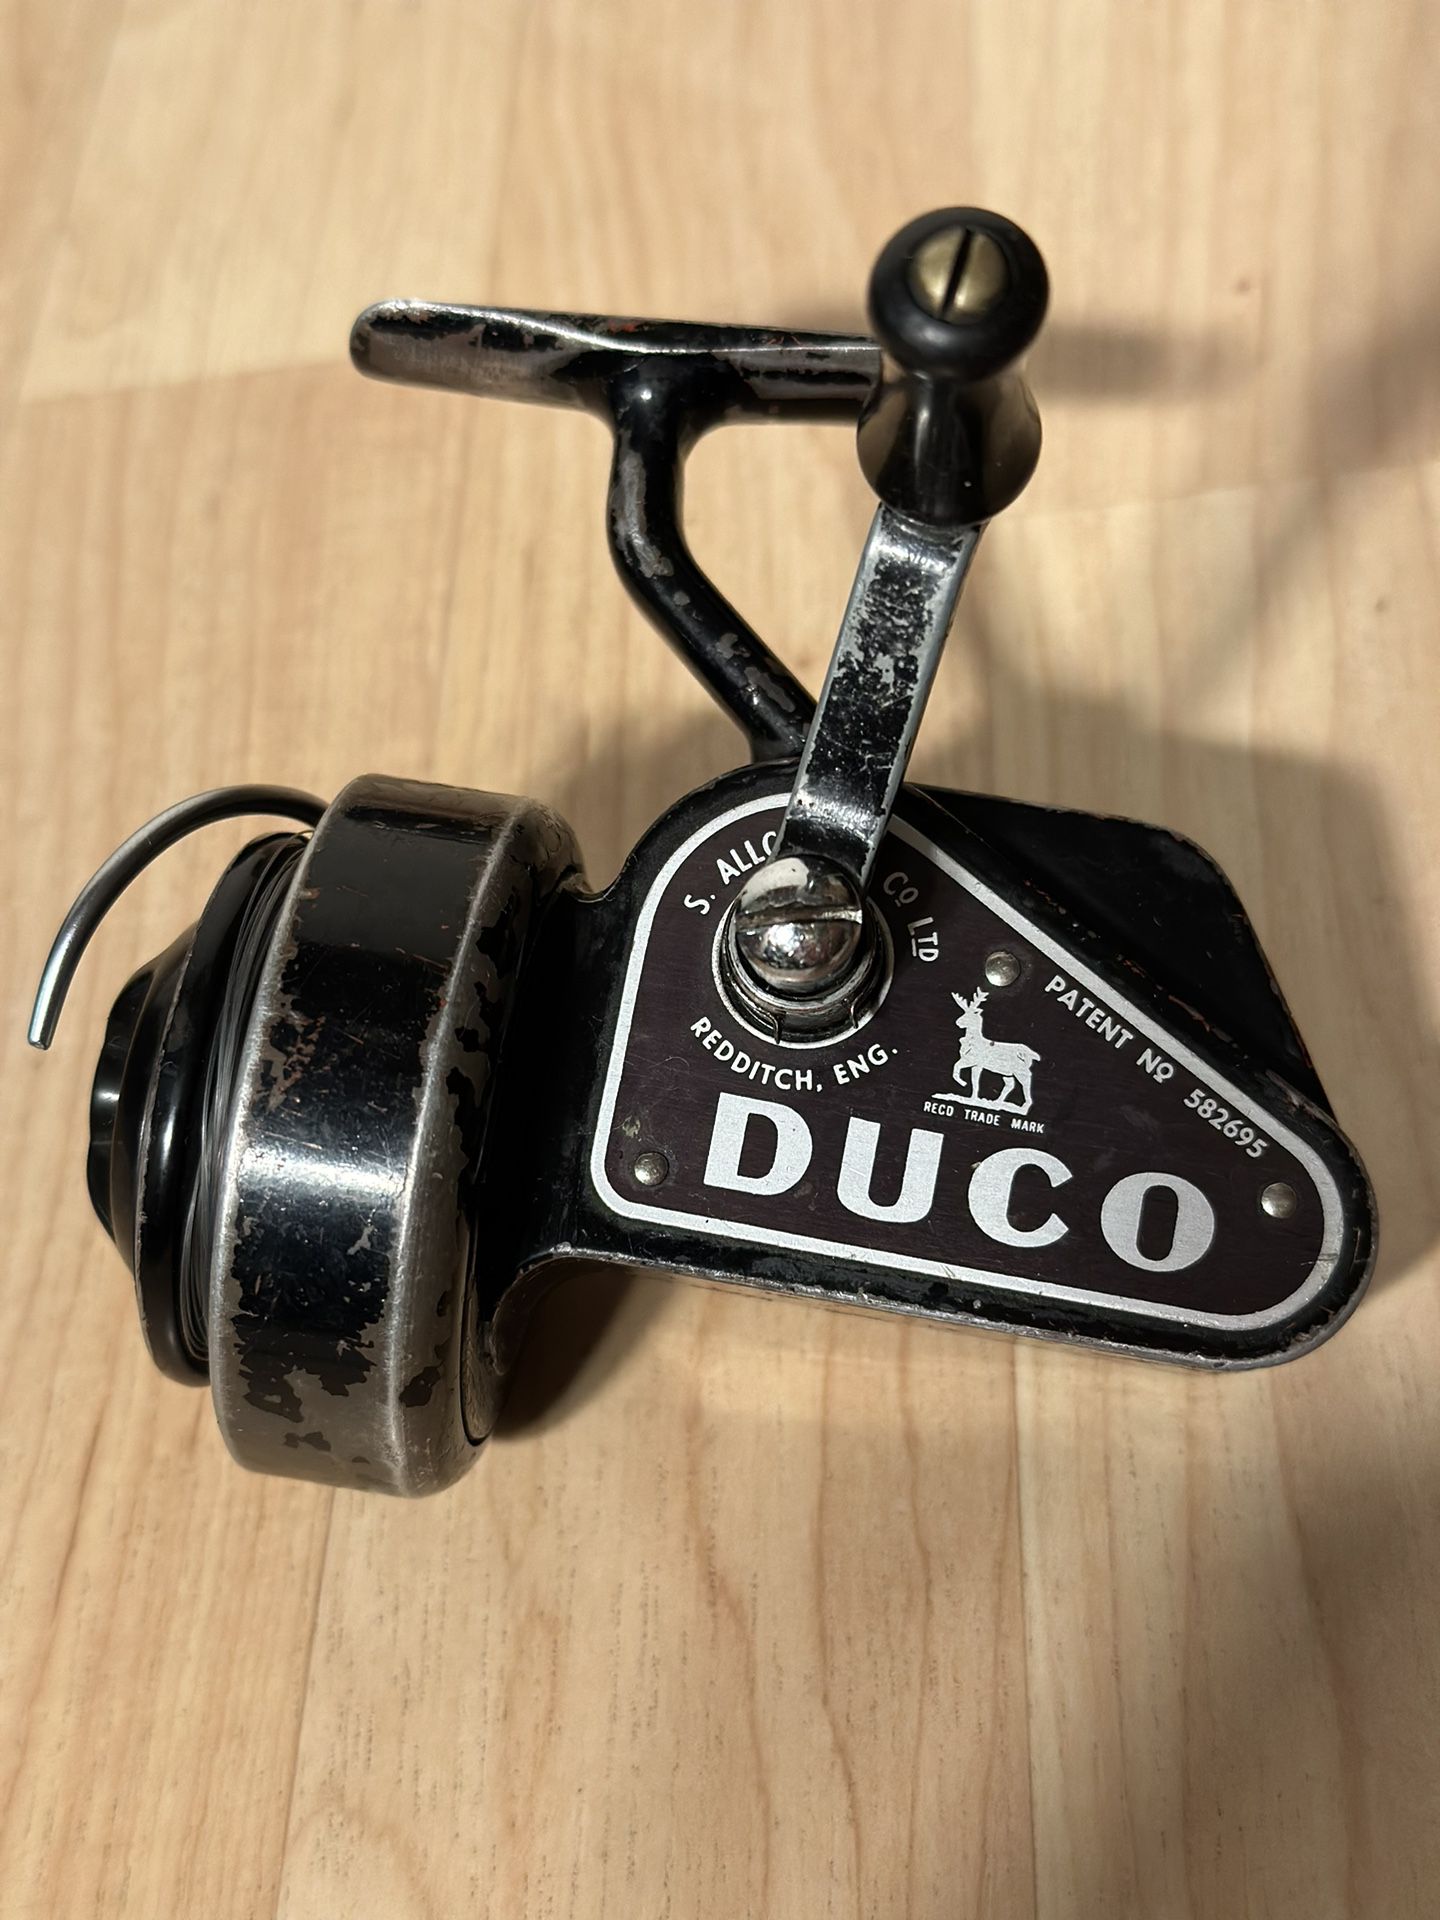 Antique Allcocks & Co.   DUCO  Half  Bail Spinning Reel - Made Redditch, England